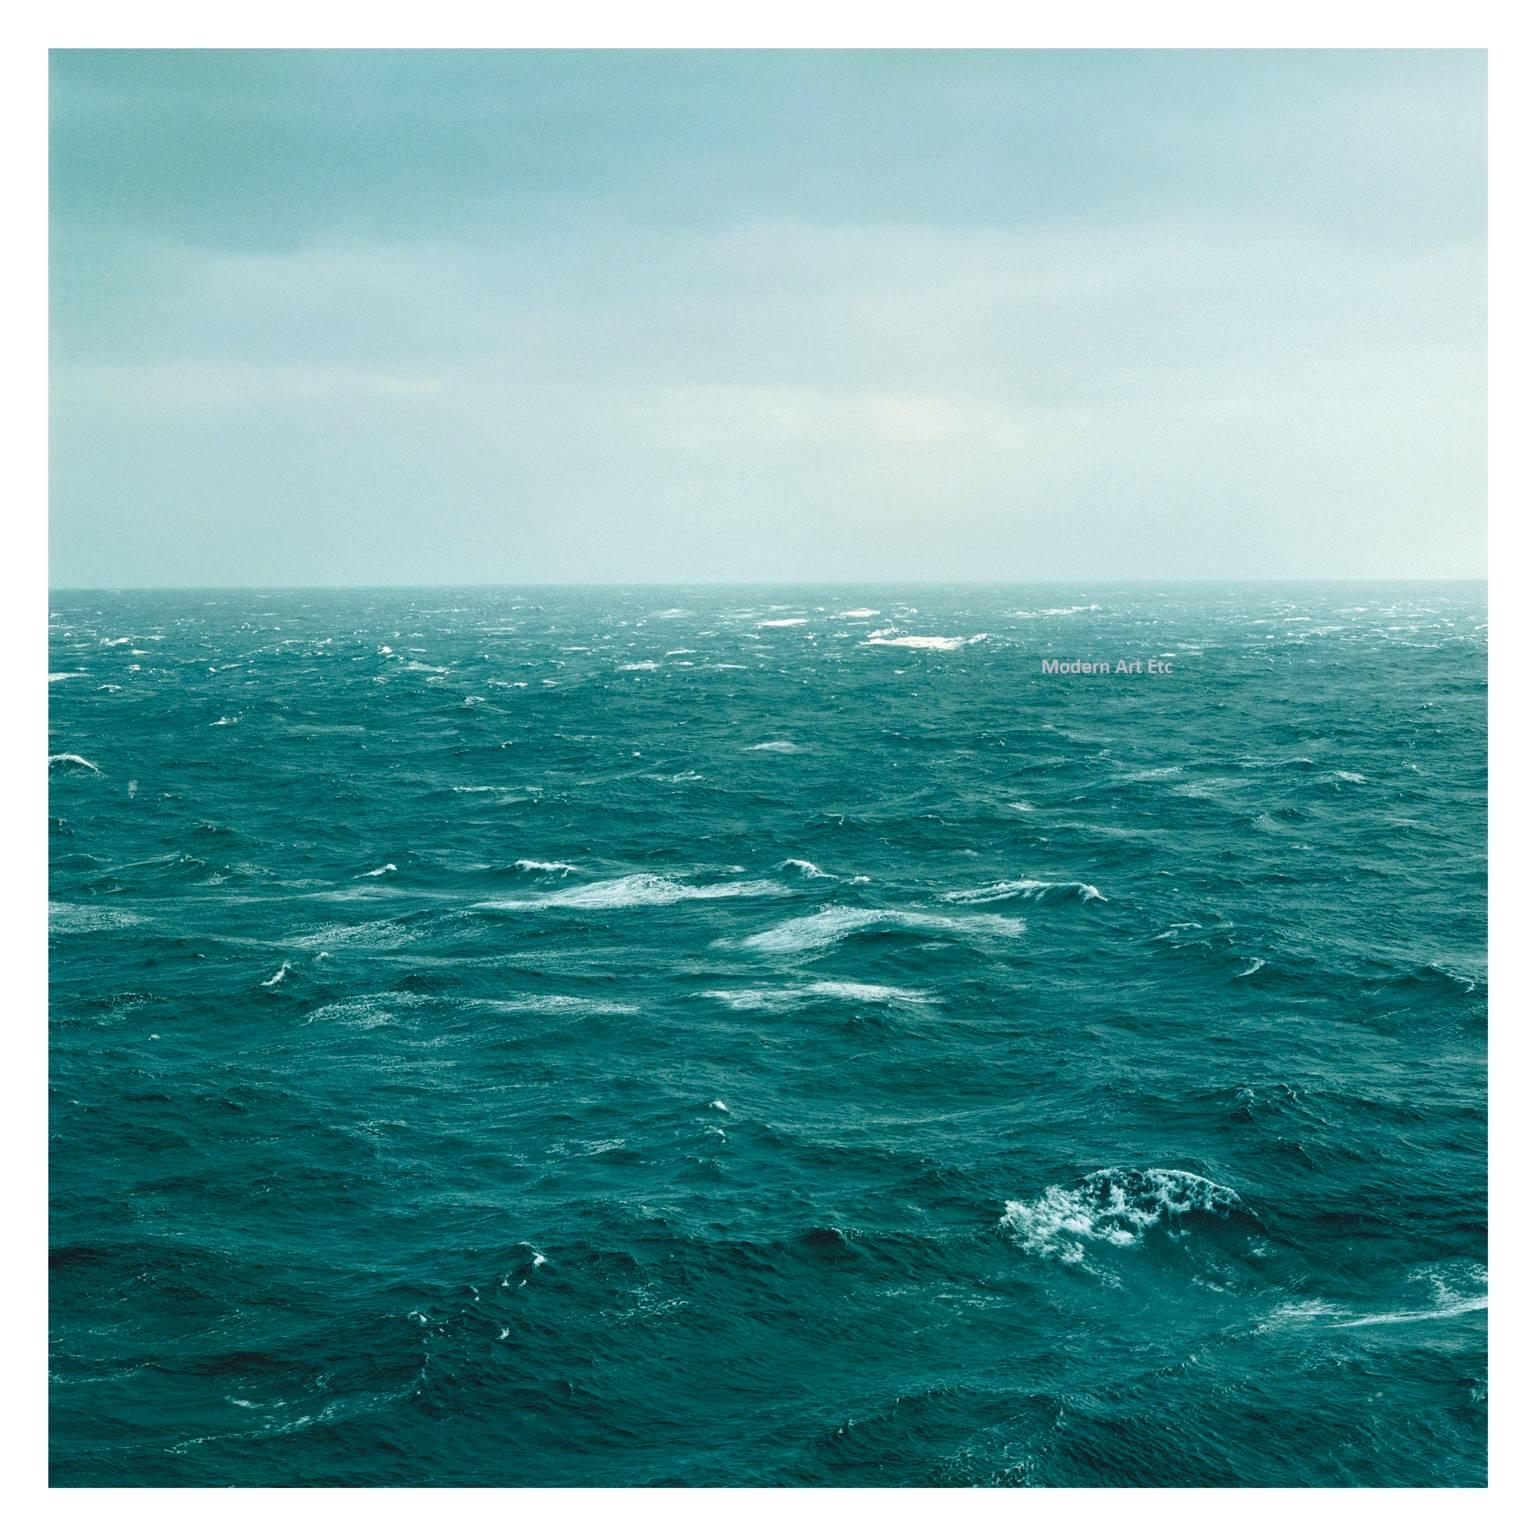 This is a series of fine art photography of the Atlantic Ocean. Exclusively available from this gallery only. Full series (12 images; 1  image is almost sold out - therefore 11/12 images available) is available on our 1stdibs storefront here titled